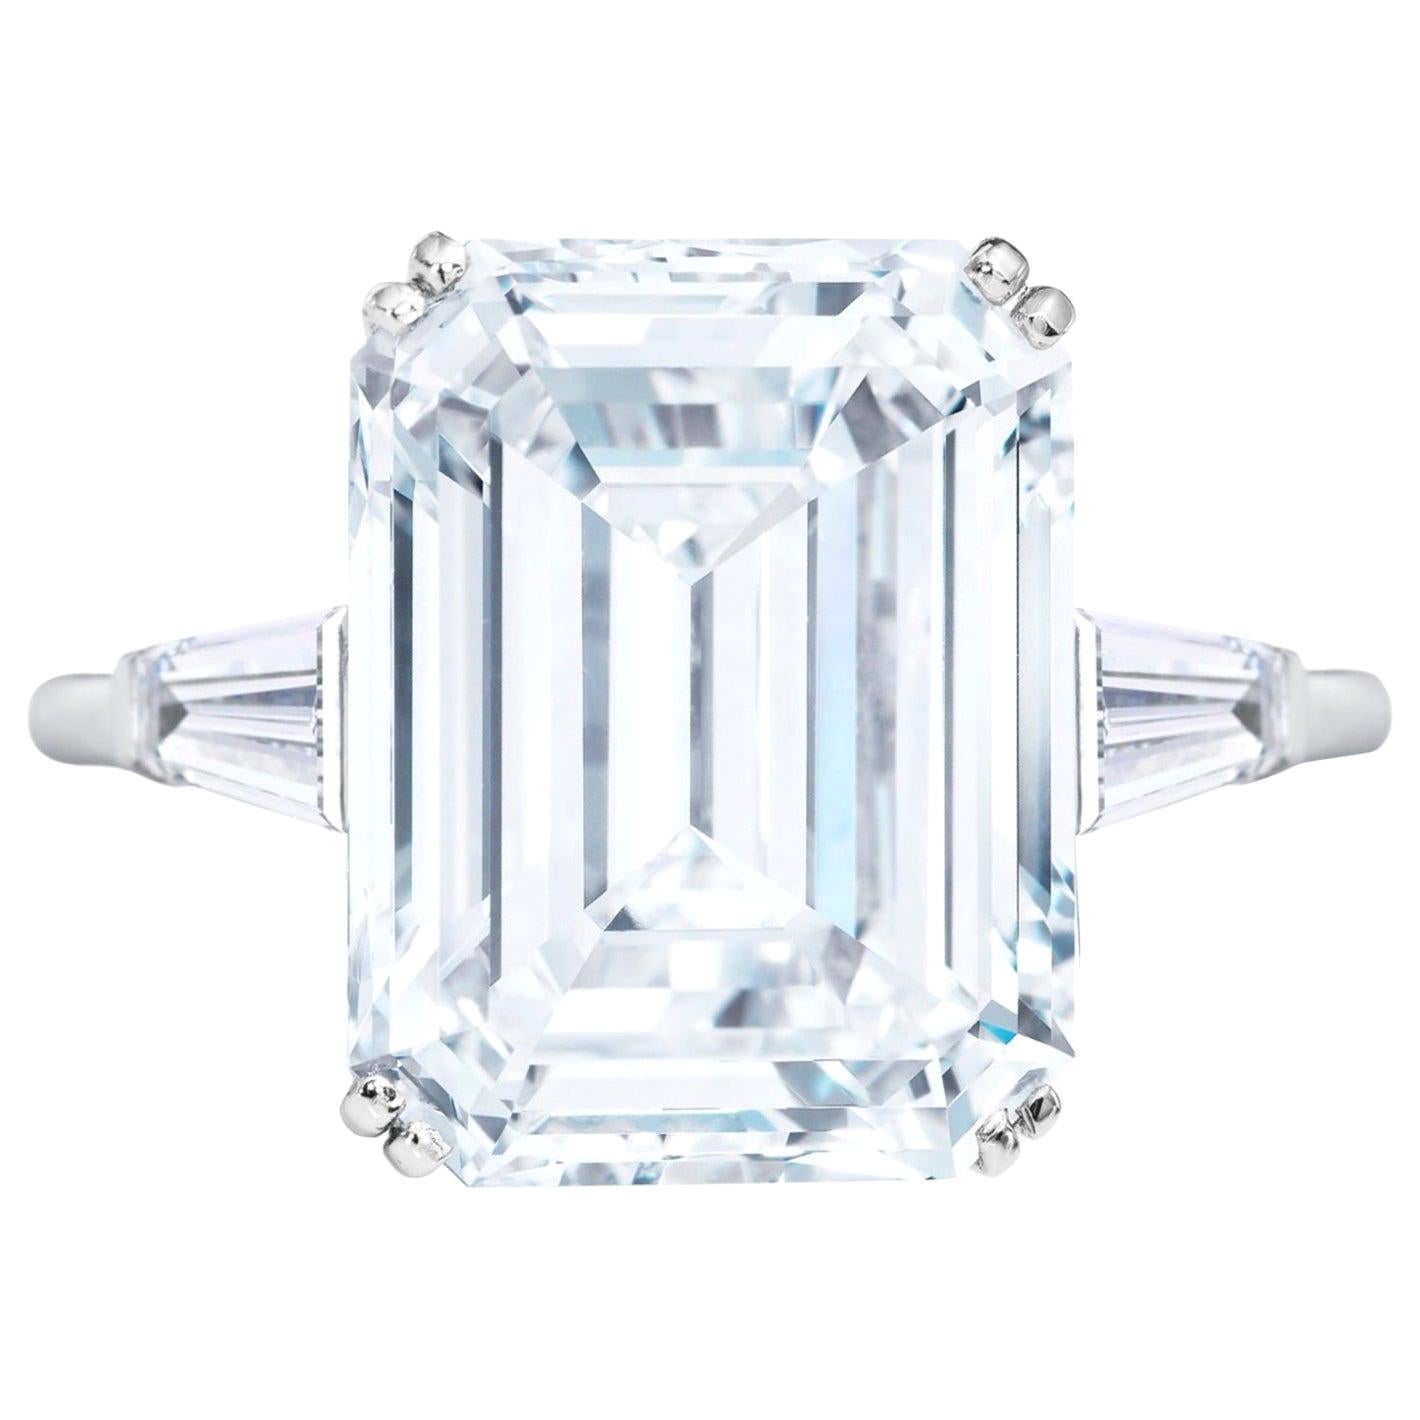 FLAWLESS GIA Certified 3 Carat Emerald Cut Diamond Solitaire Ring